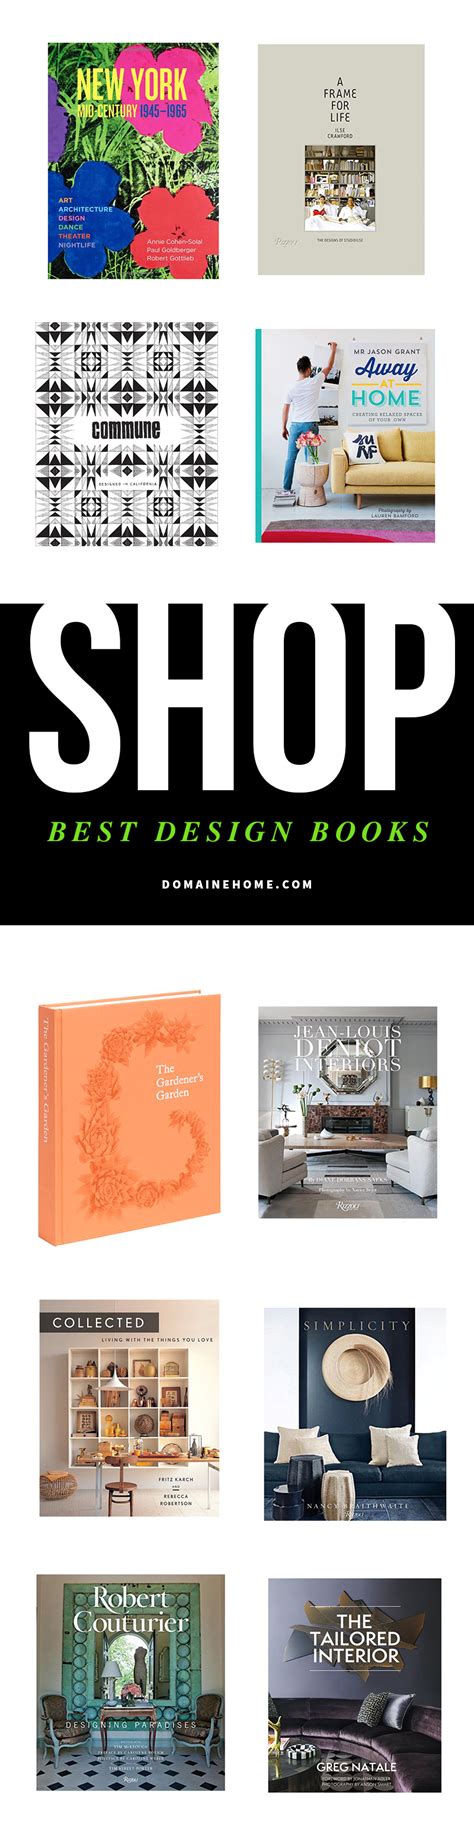 The 11 Interior Design Books To Add To Your Collection This Year